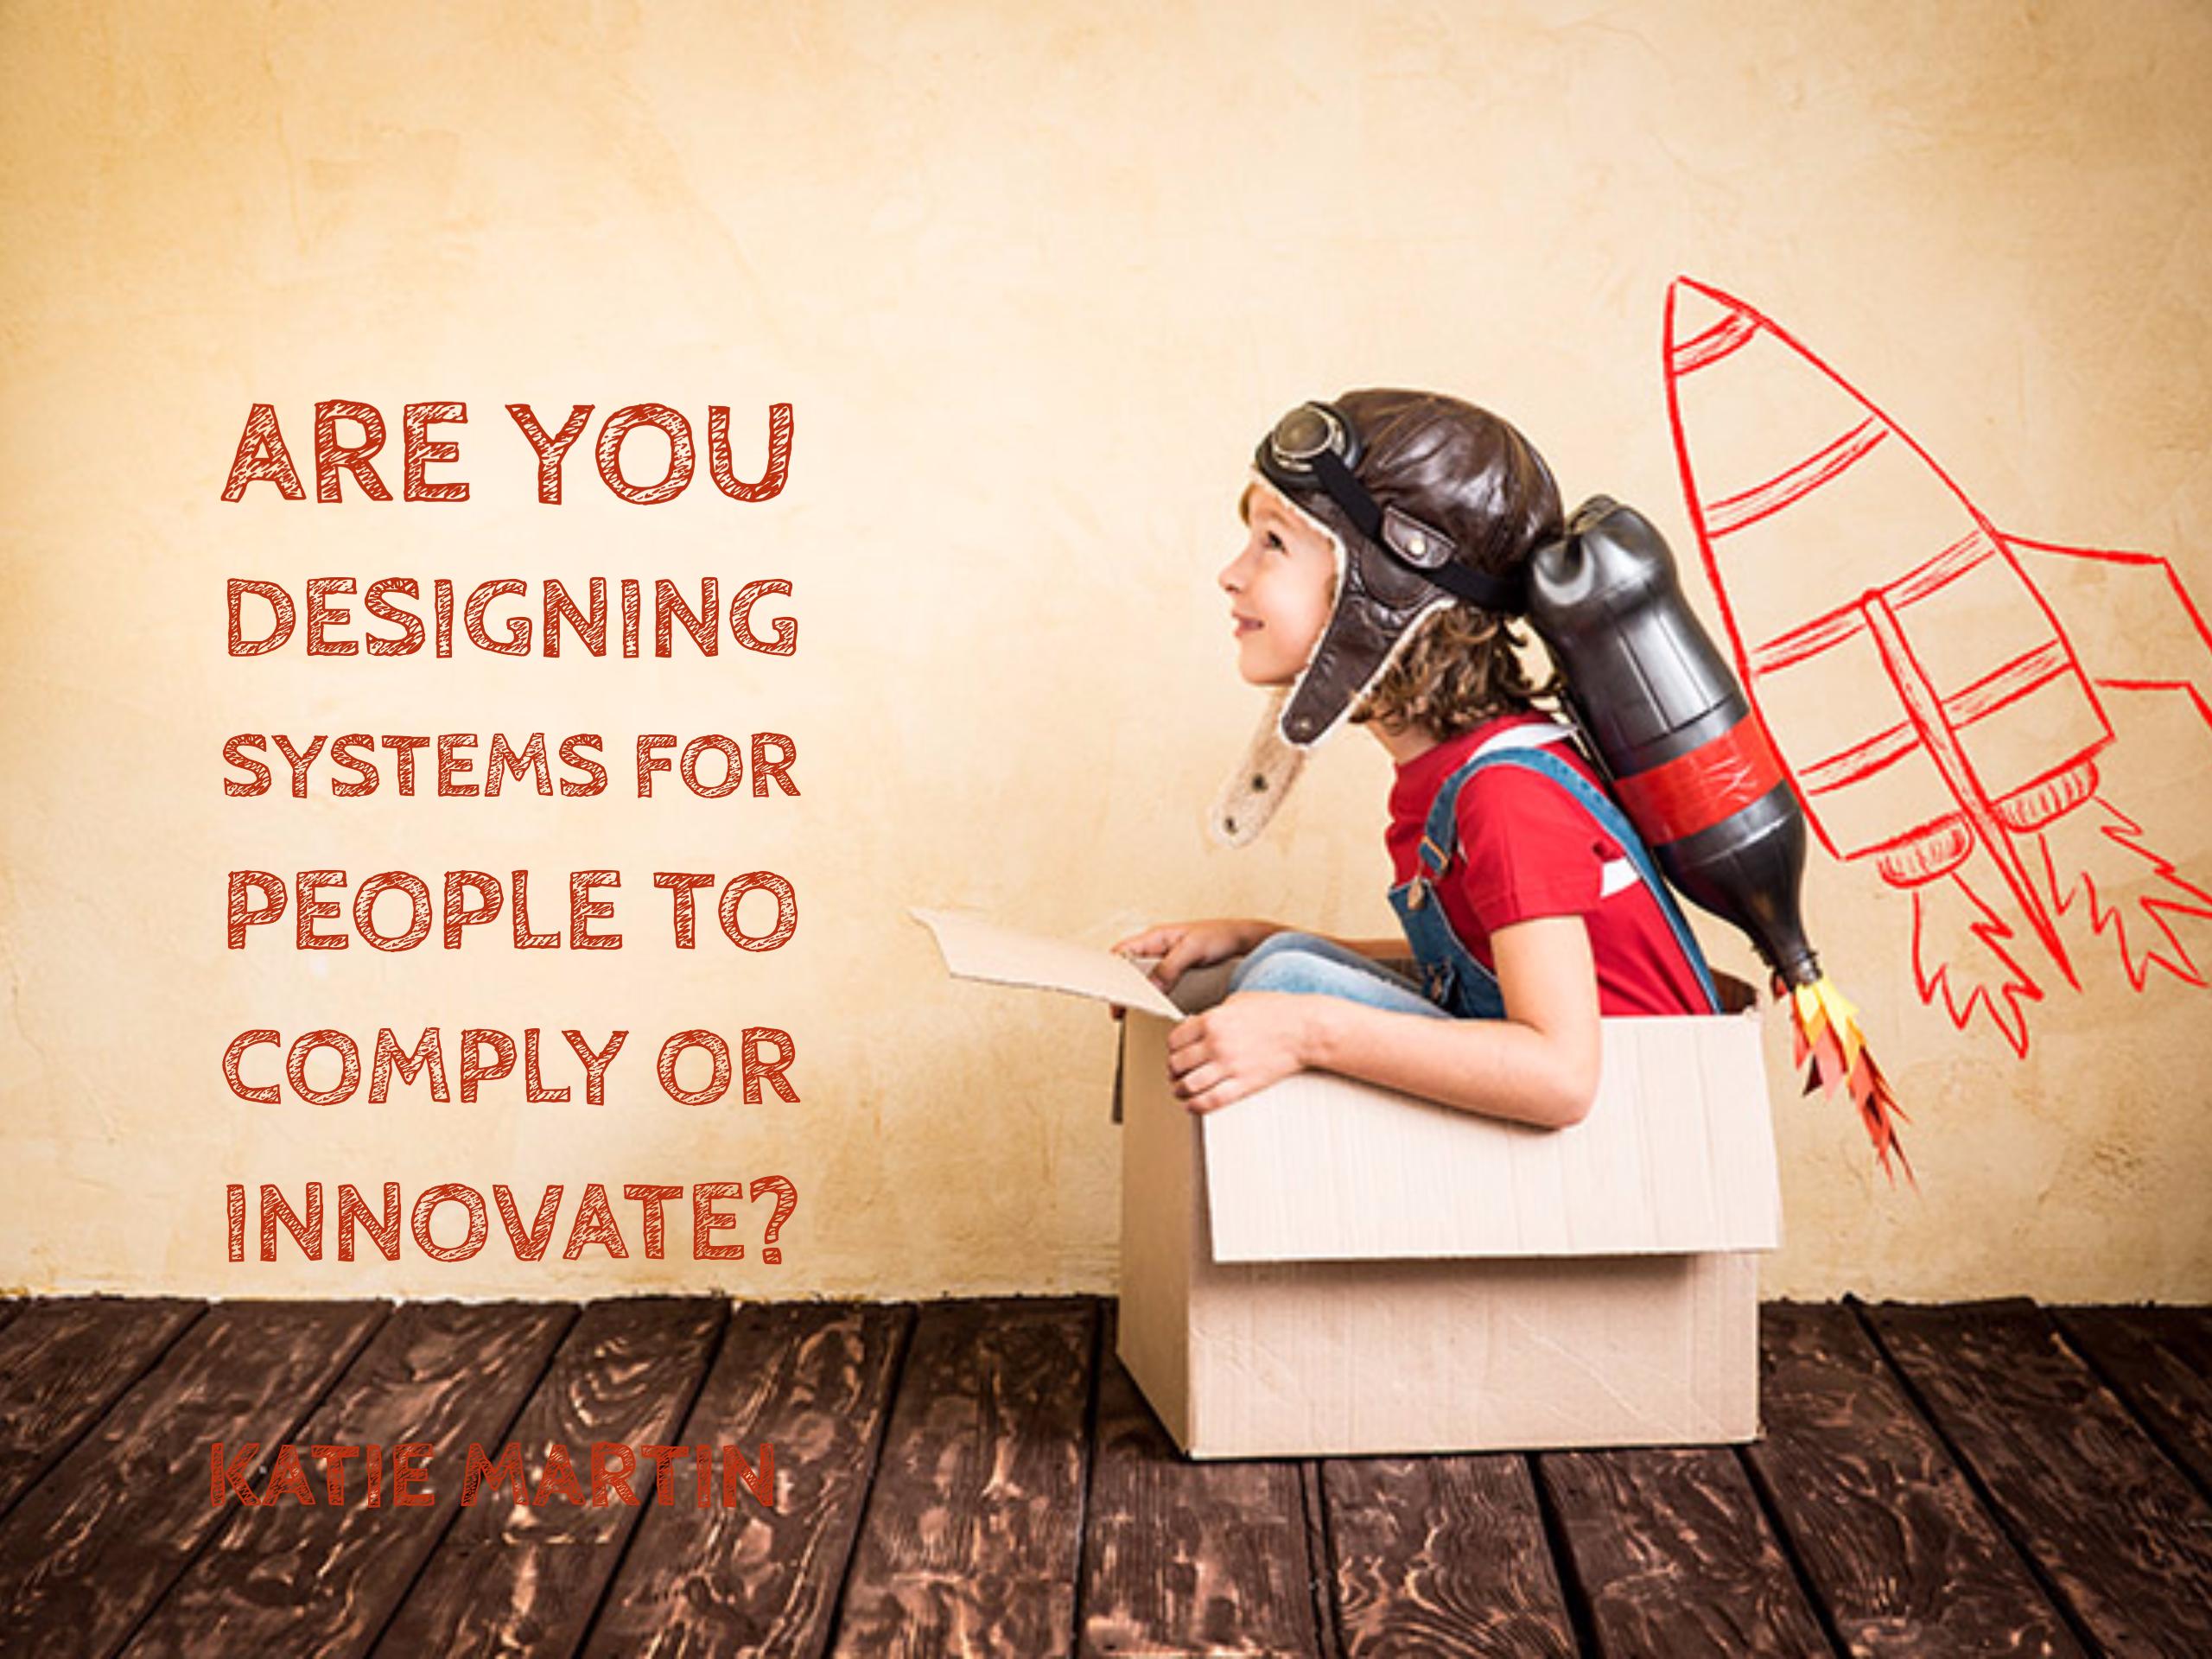 Are You Designing Systems for People to Comply or Innovate?